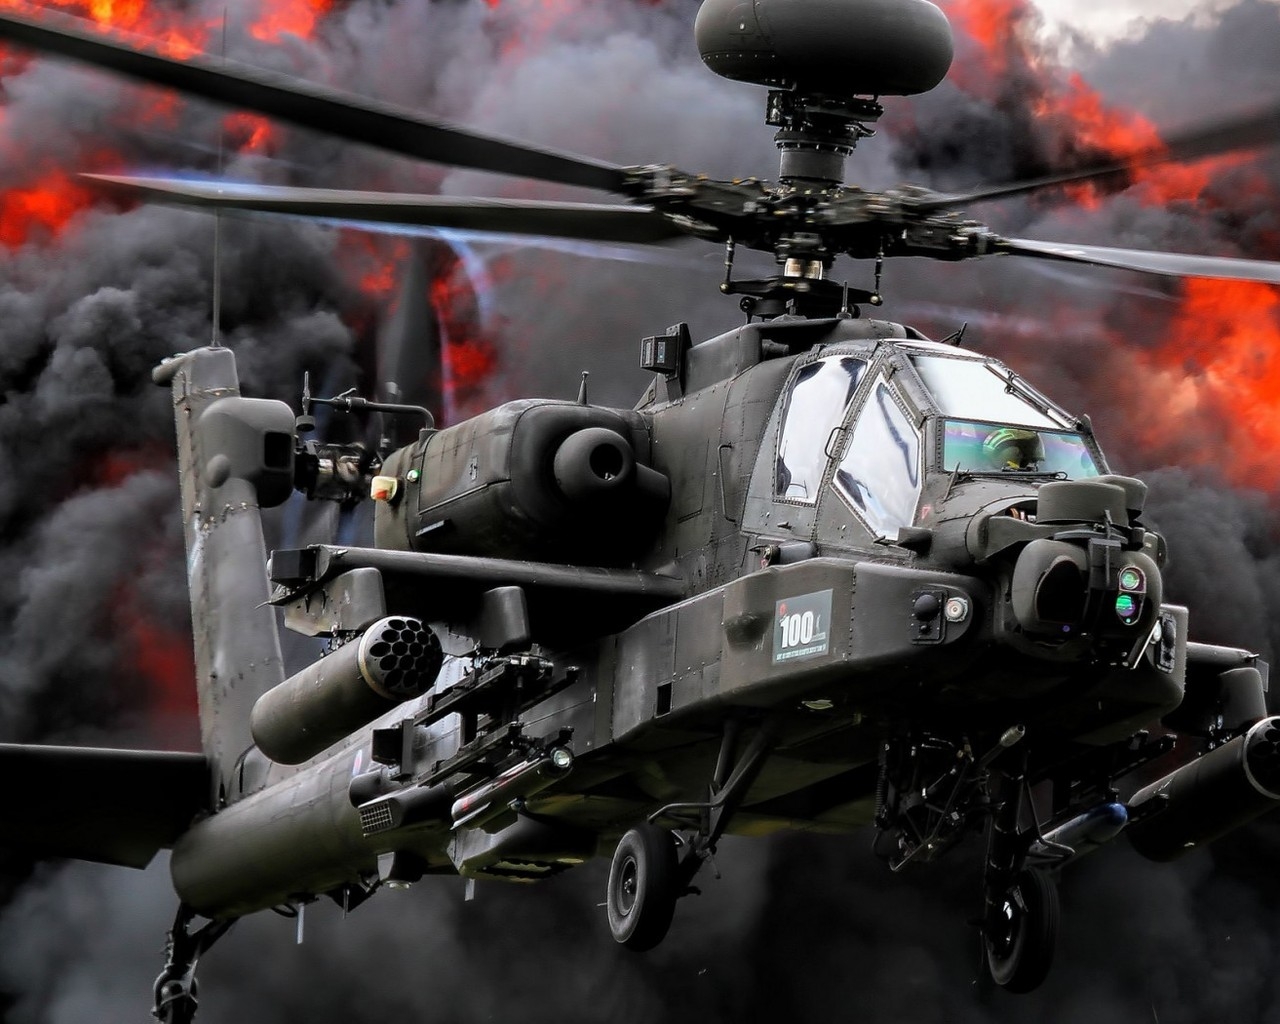 Boeing AH 64 Apache for 1280 x 1024 resolution